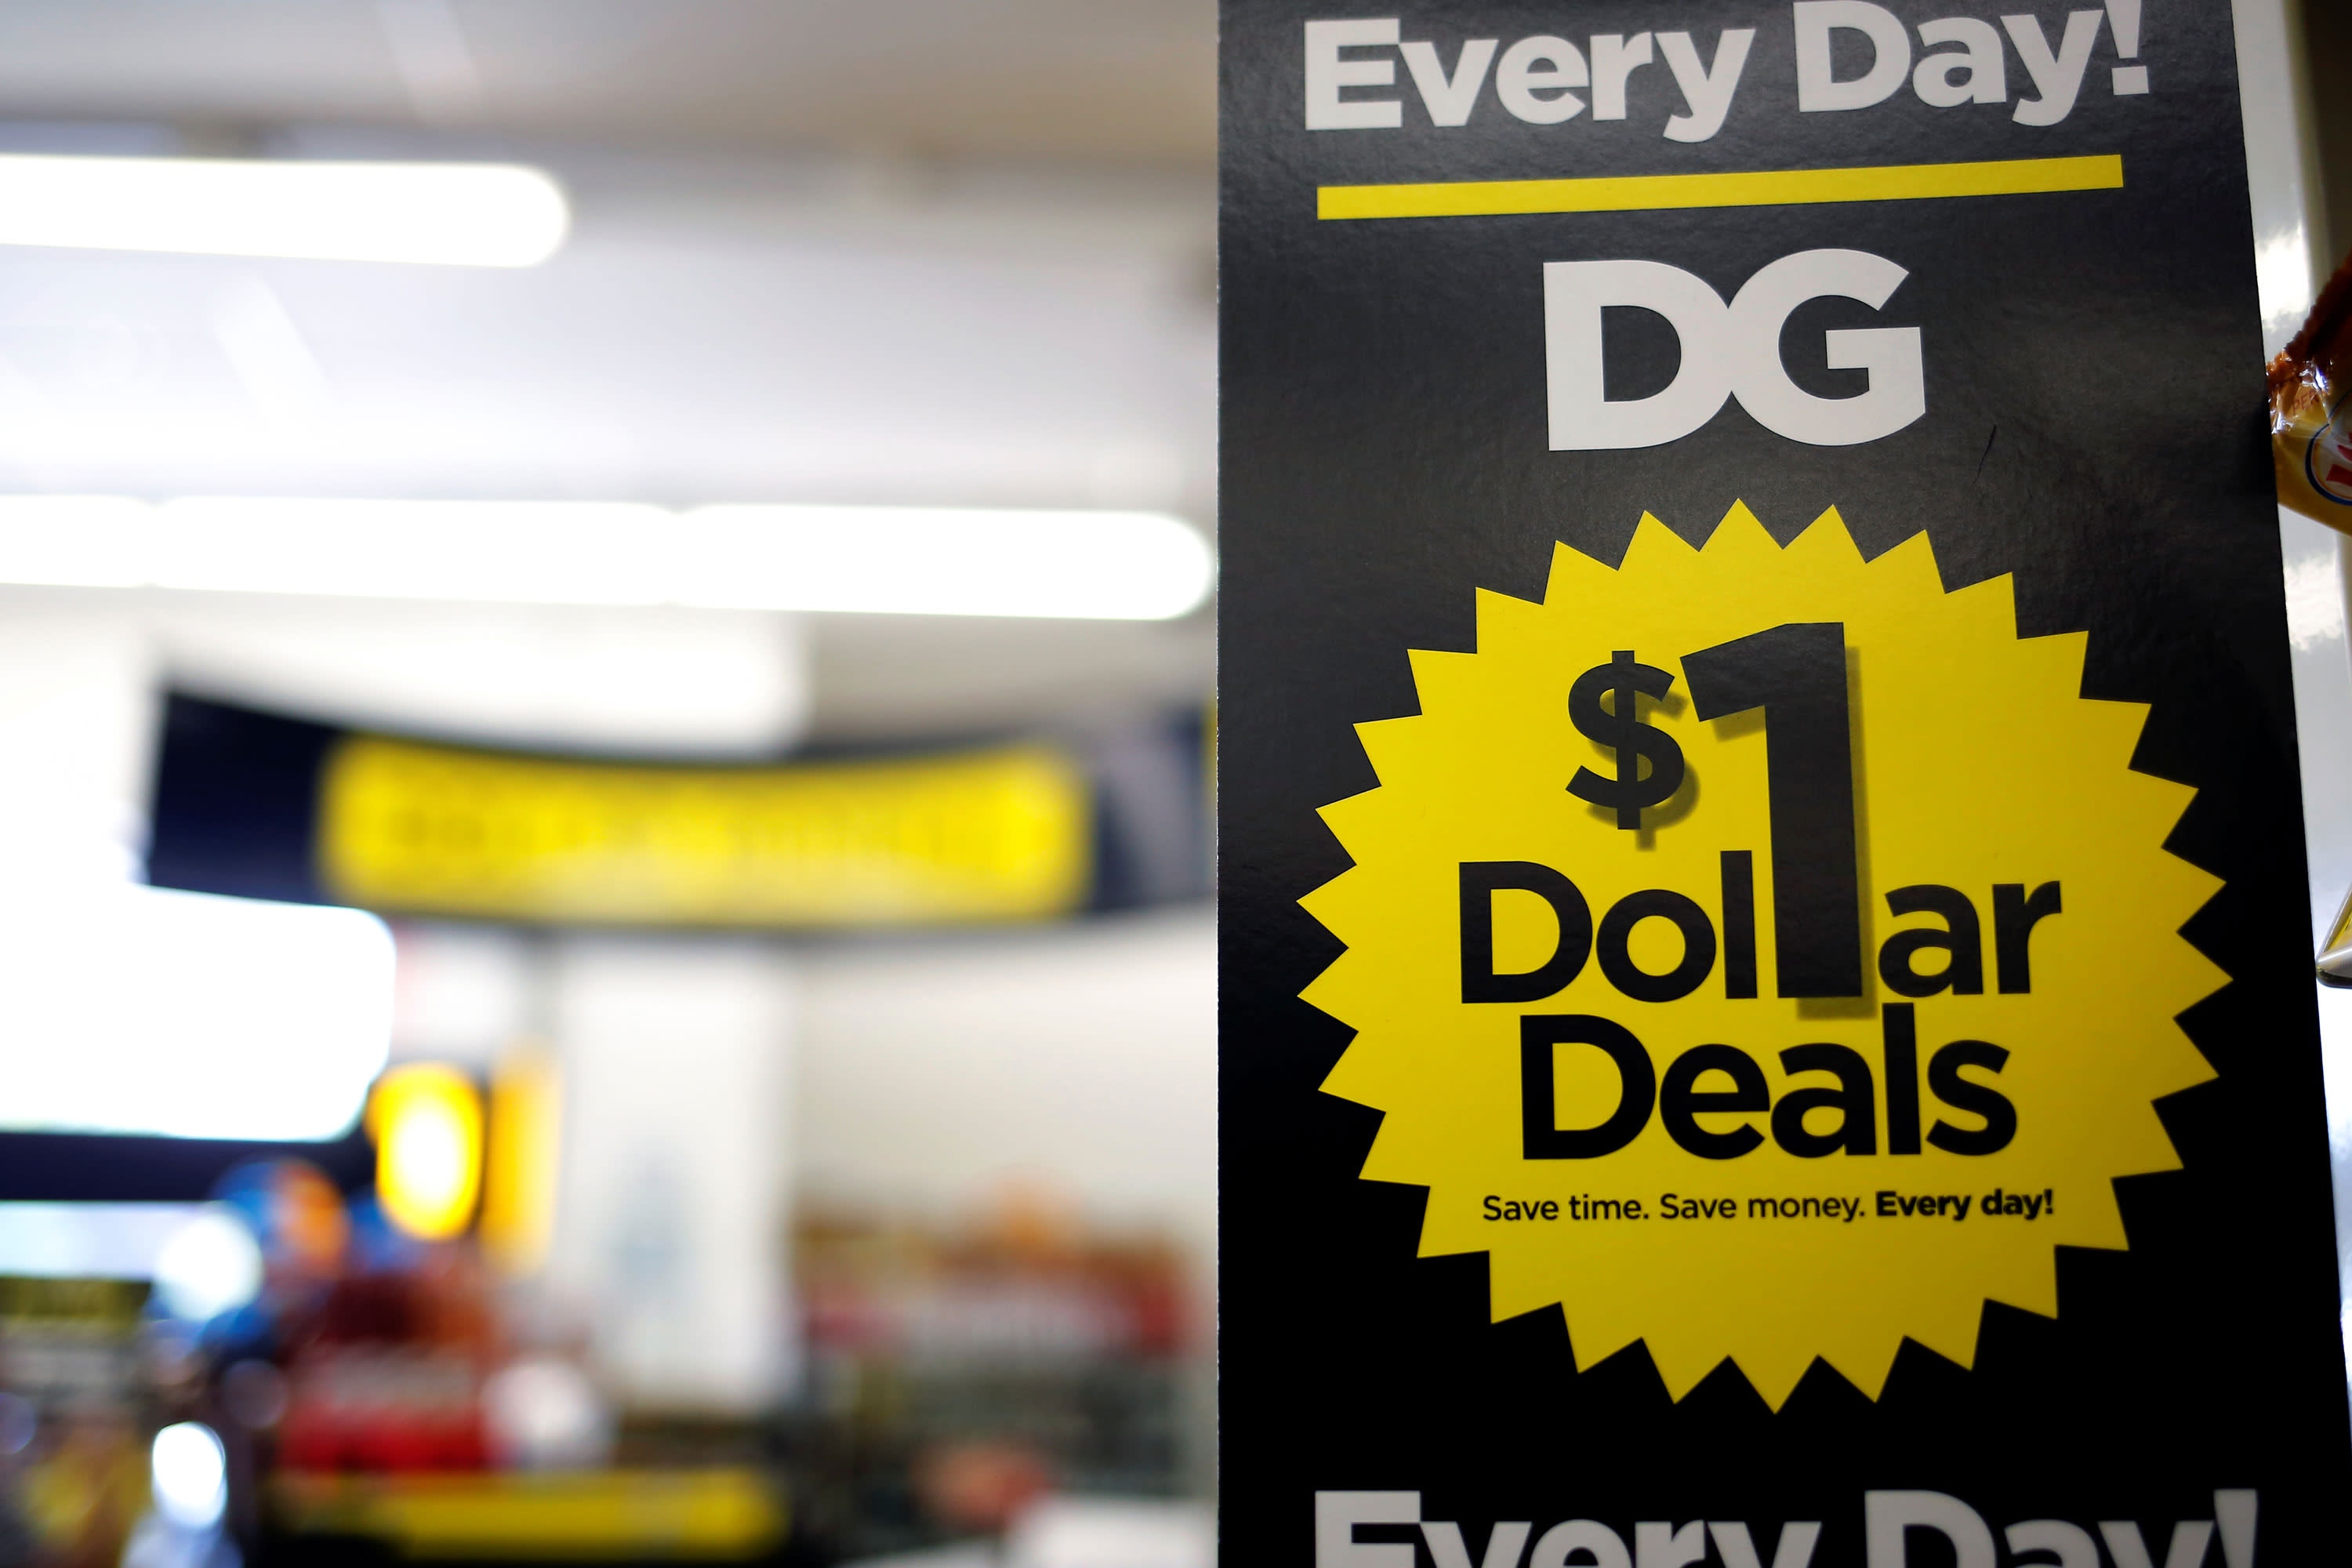 Dollar General CEO says most of its stores are in 'health deserts,' creating big business opportunity